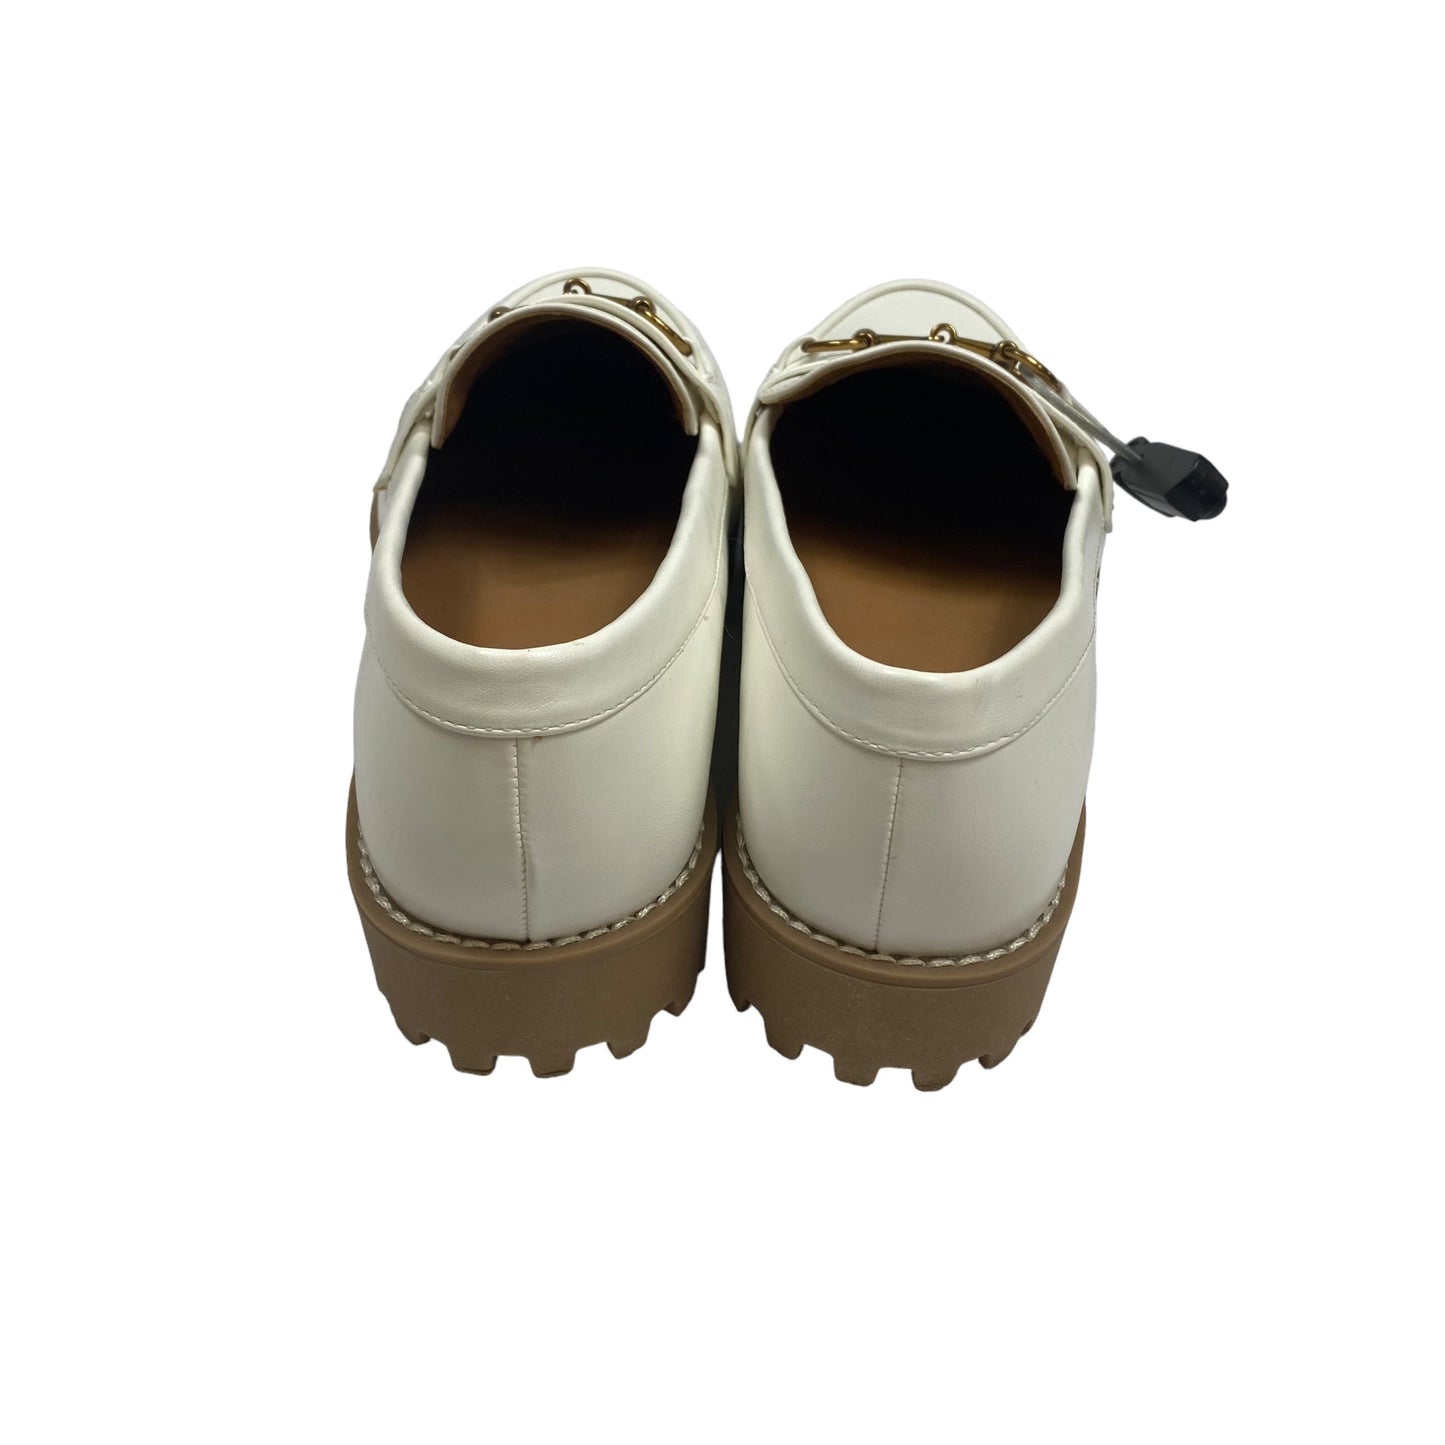 Cream Shoes Flats A New Day, Size 8